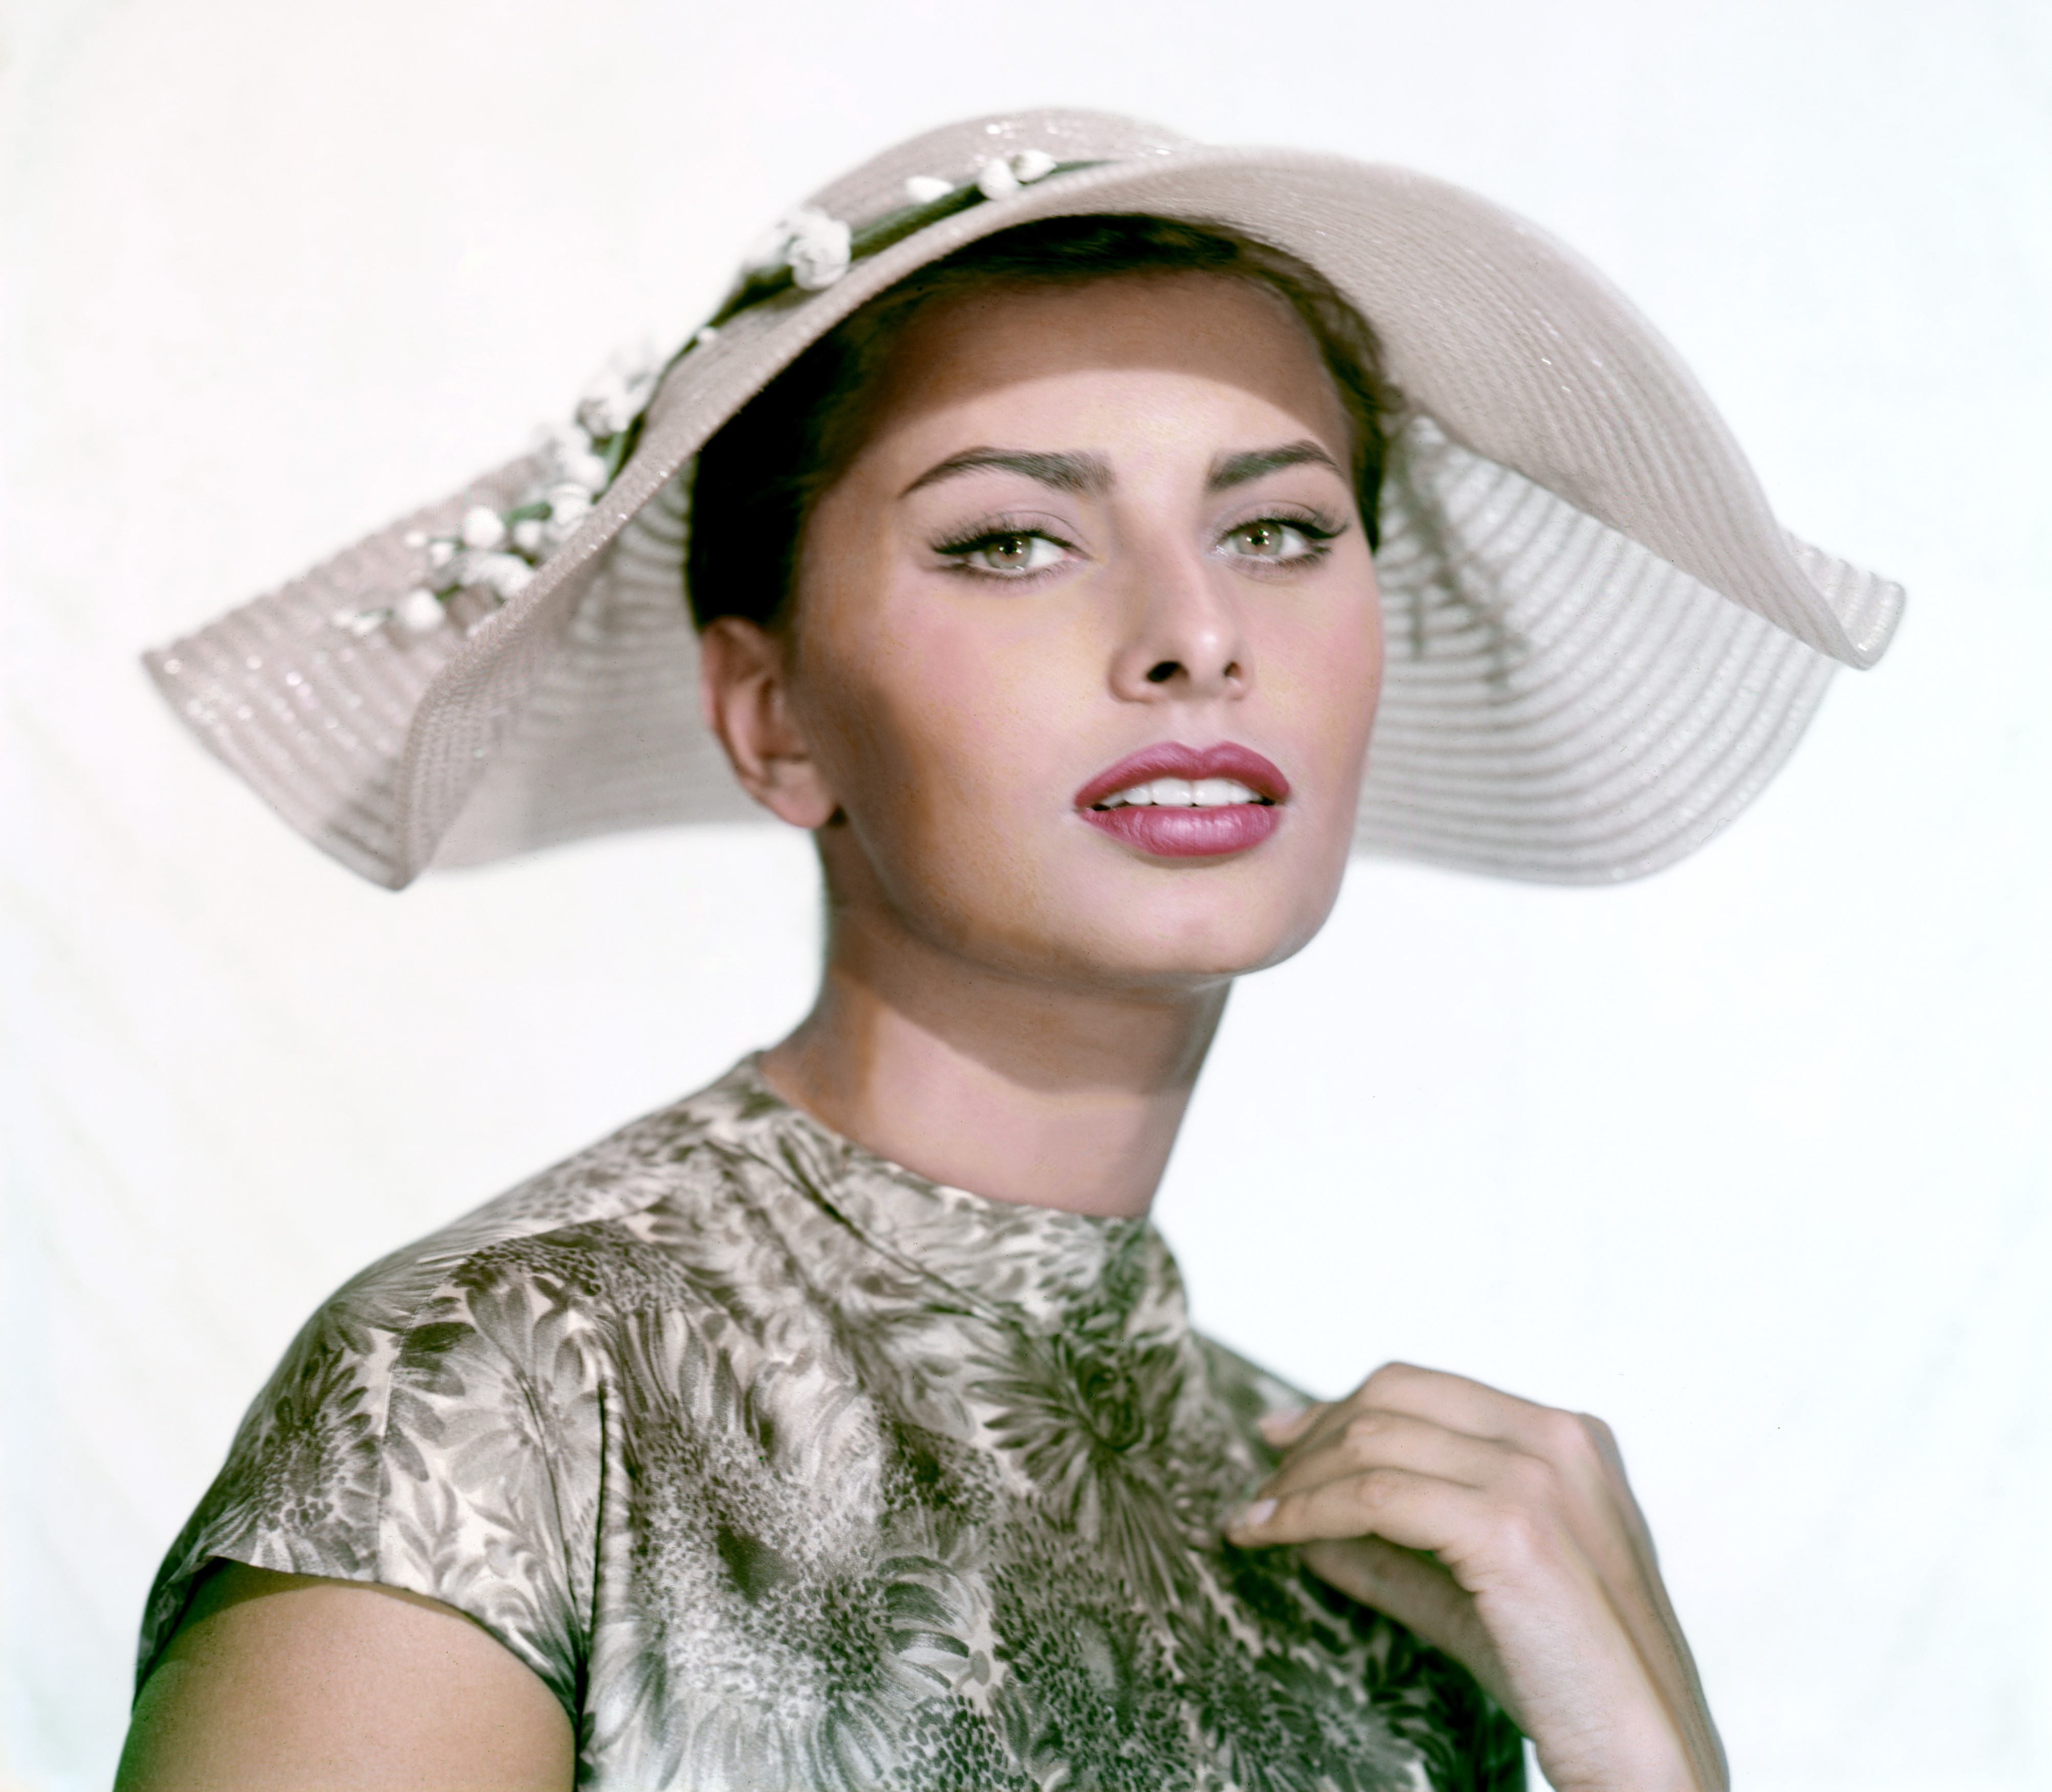 Sophia Loren in the 50s. | Source: Getty Images